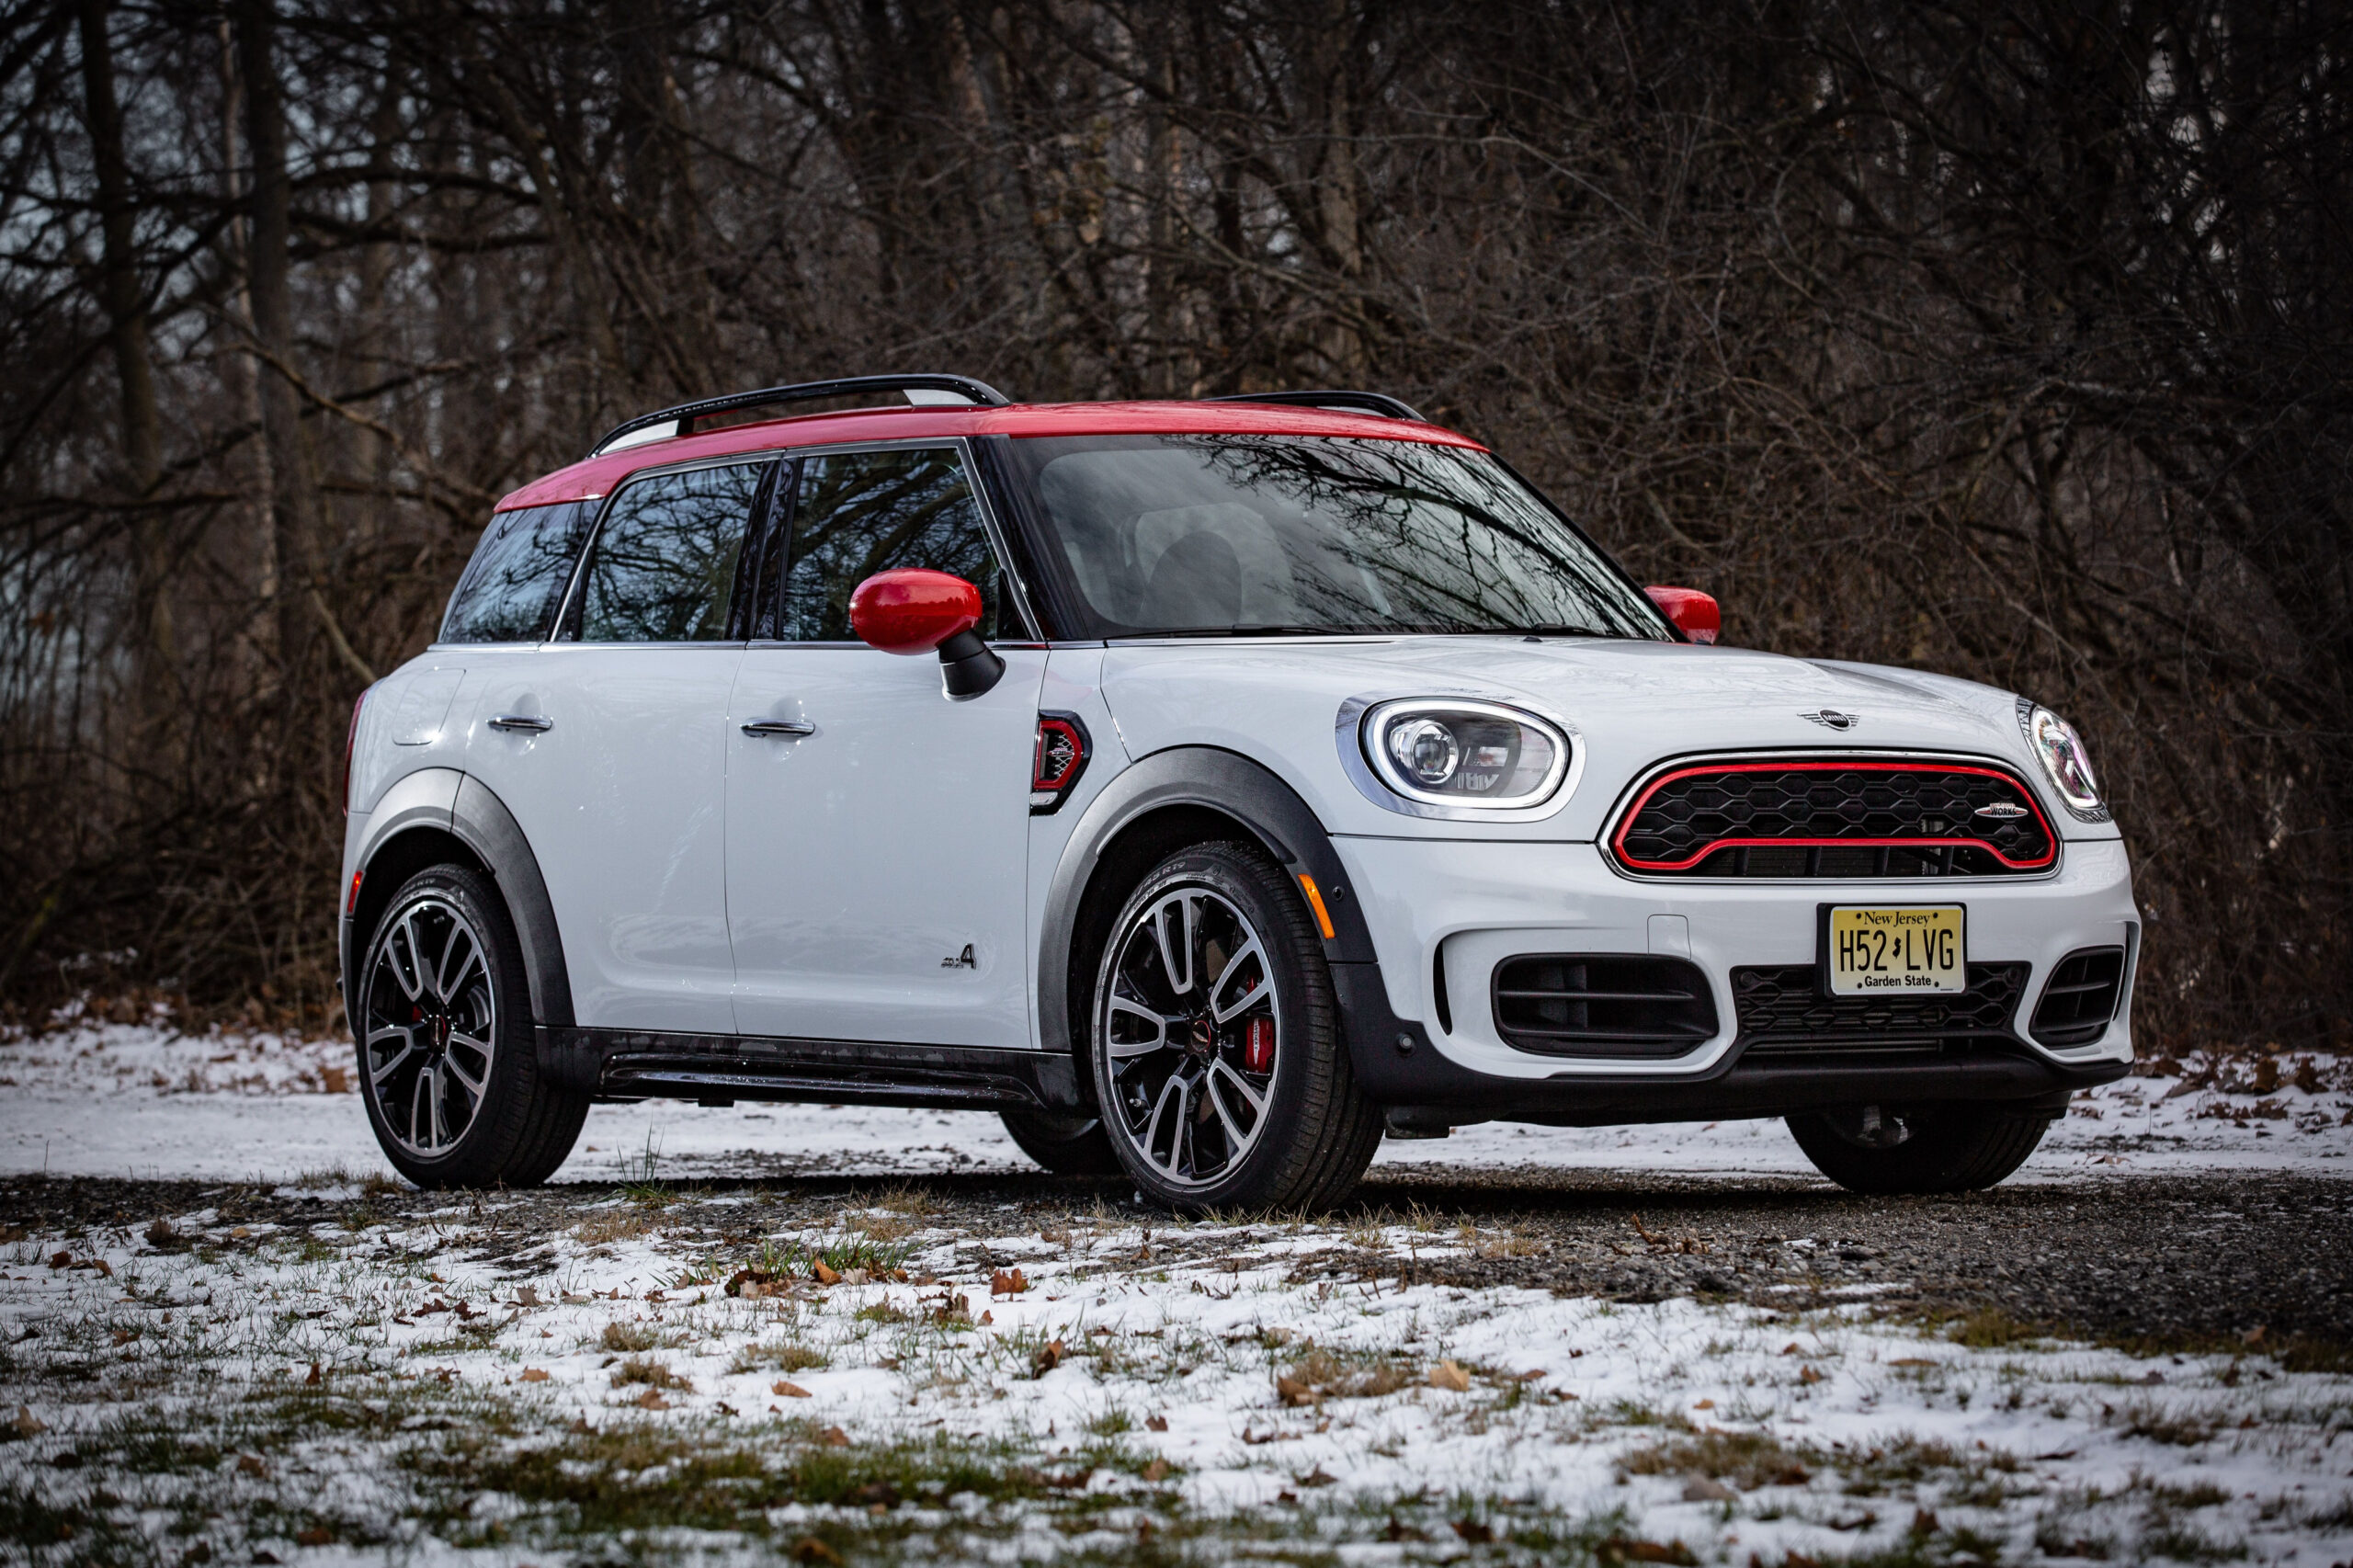 4 Mini Cooper Countryman Jcw Review, Pricing, And Specs Mini Cooper Countryman Prices